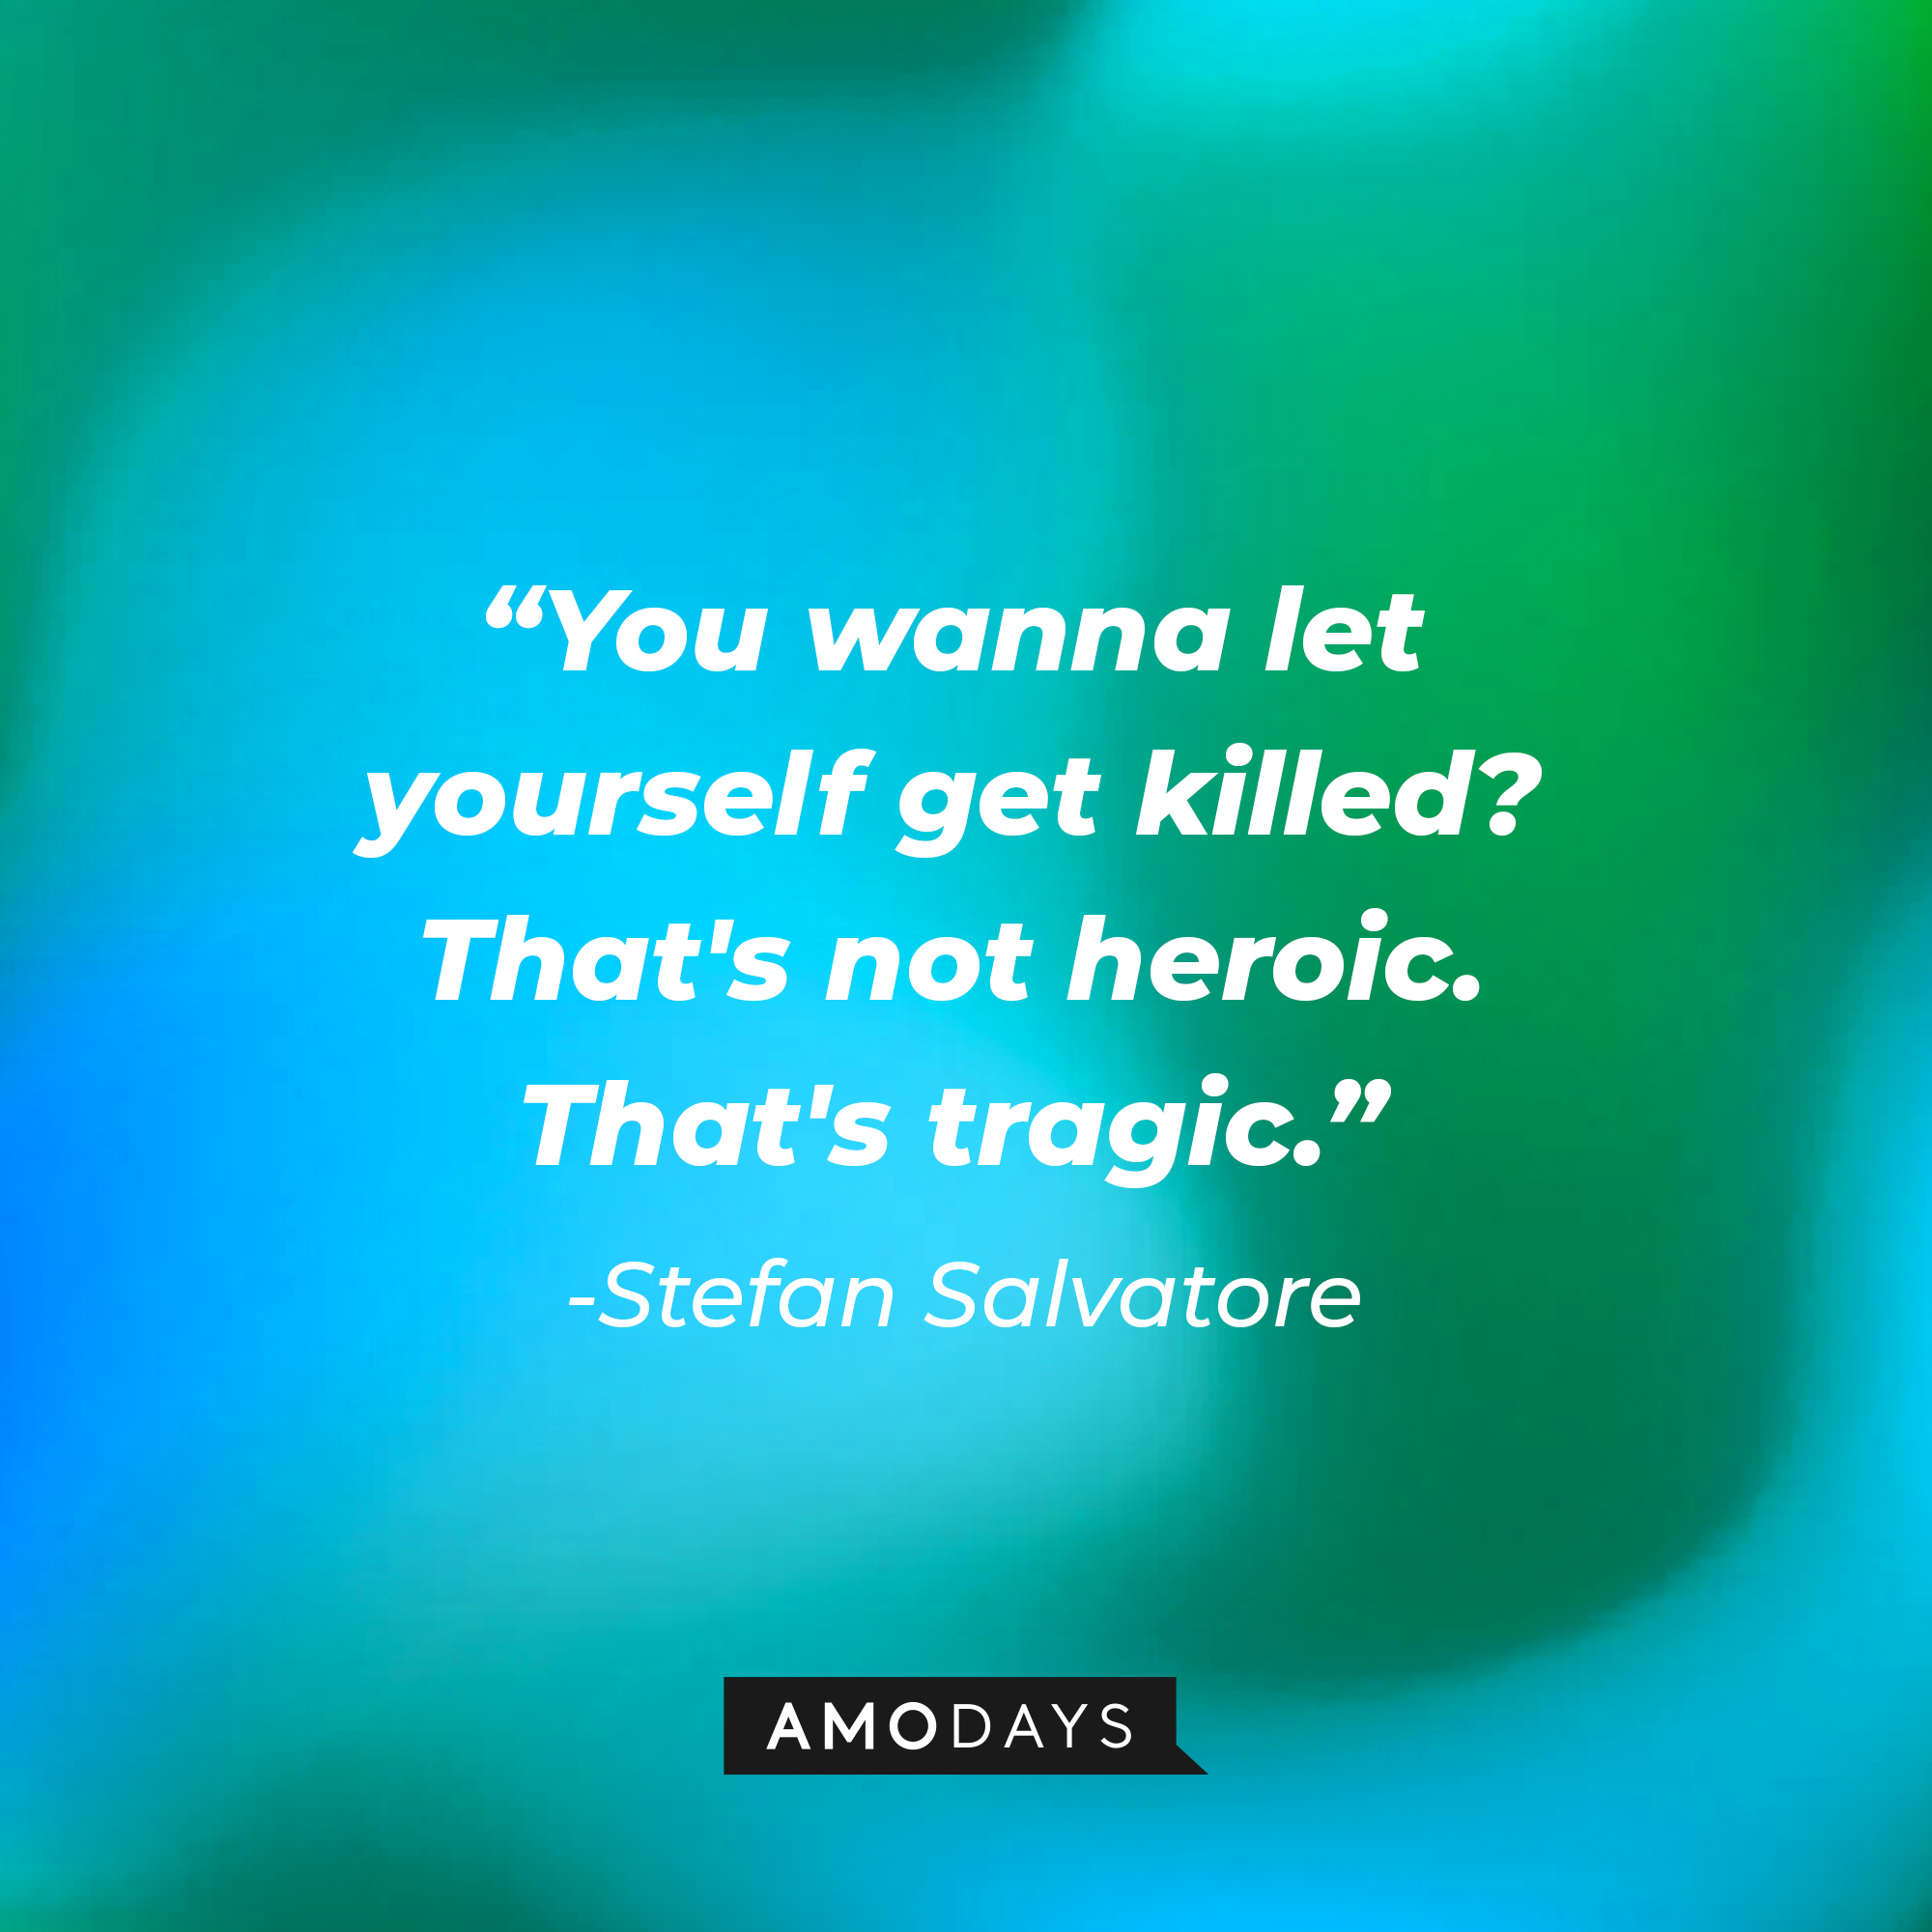 Stefan Salvatore's quote: "You wanna let yourself get killed? That's not heroic. That's tragic." | Source: AmoDays